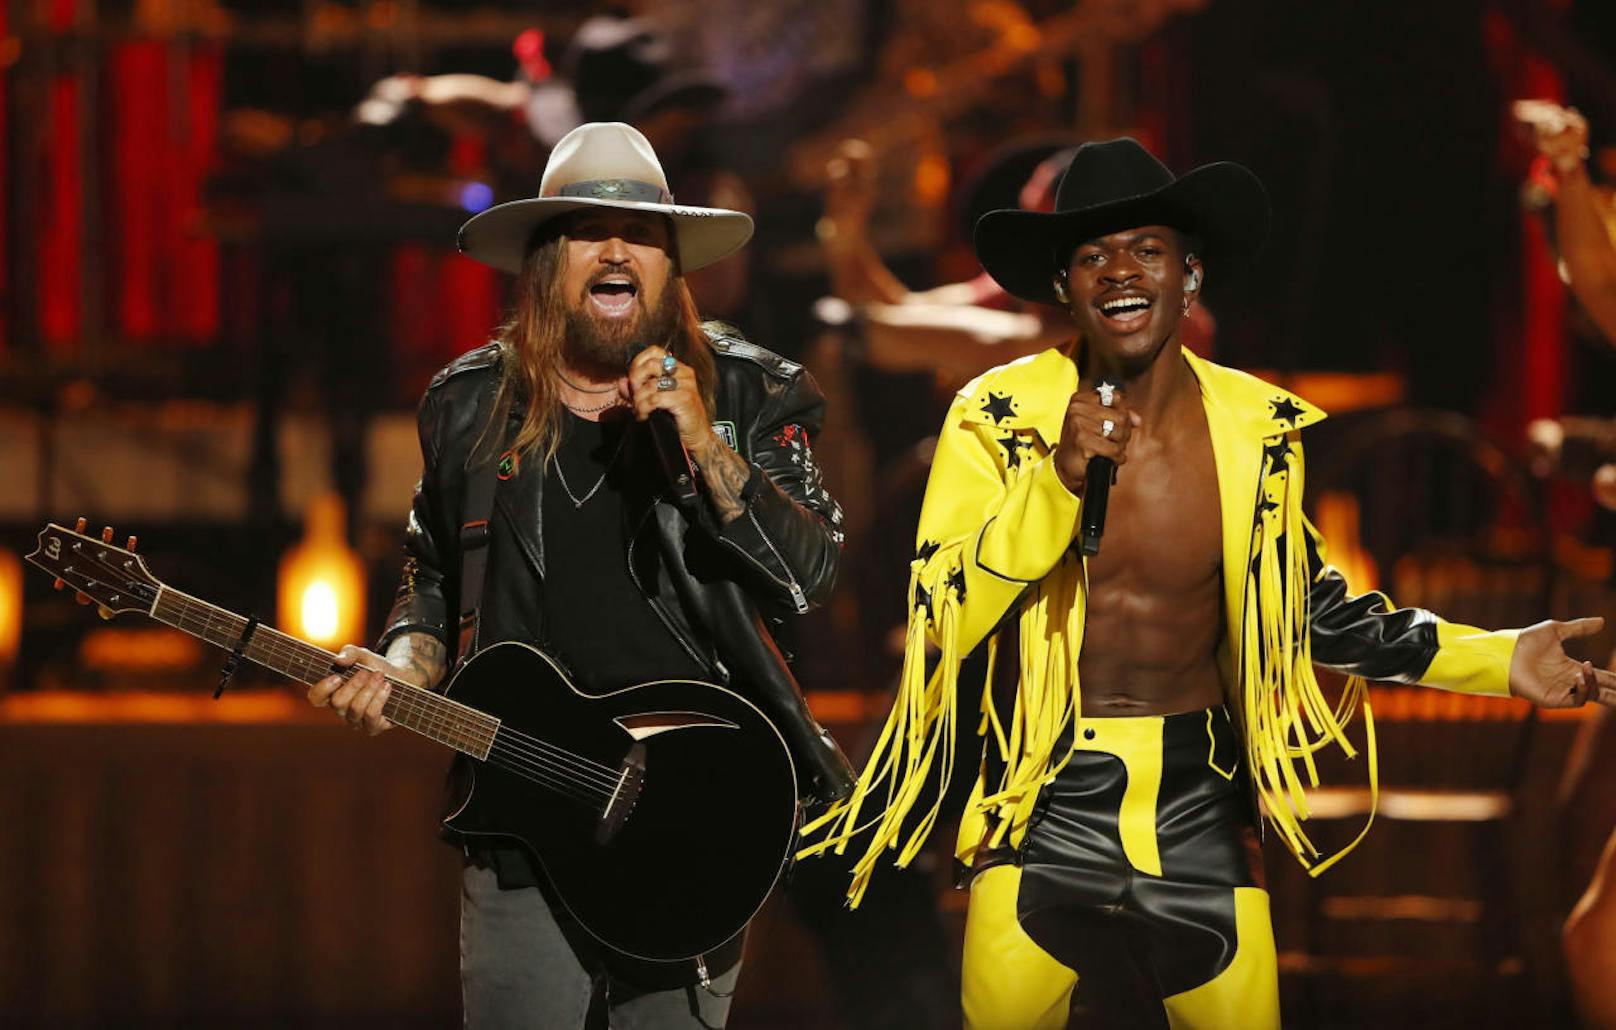 4. "Old Town Road - Remix" - Billy Ray Cyrus & Lil Nas X